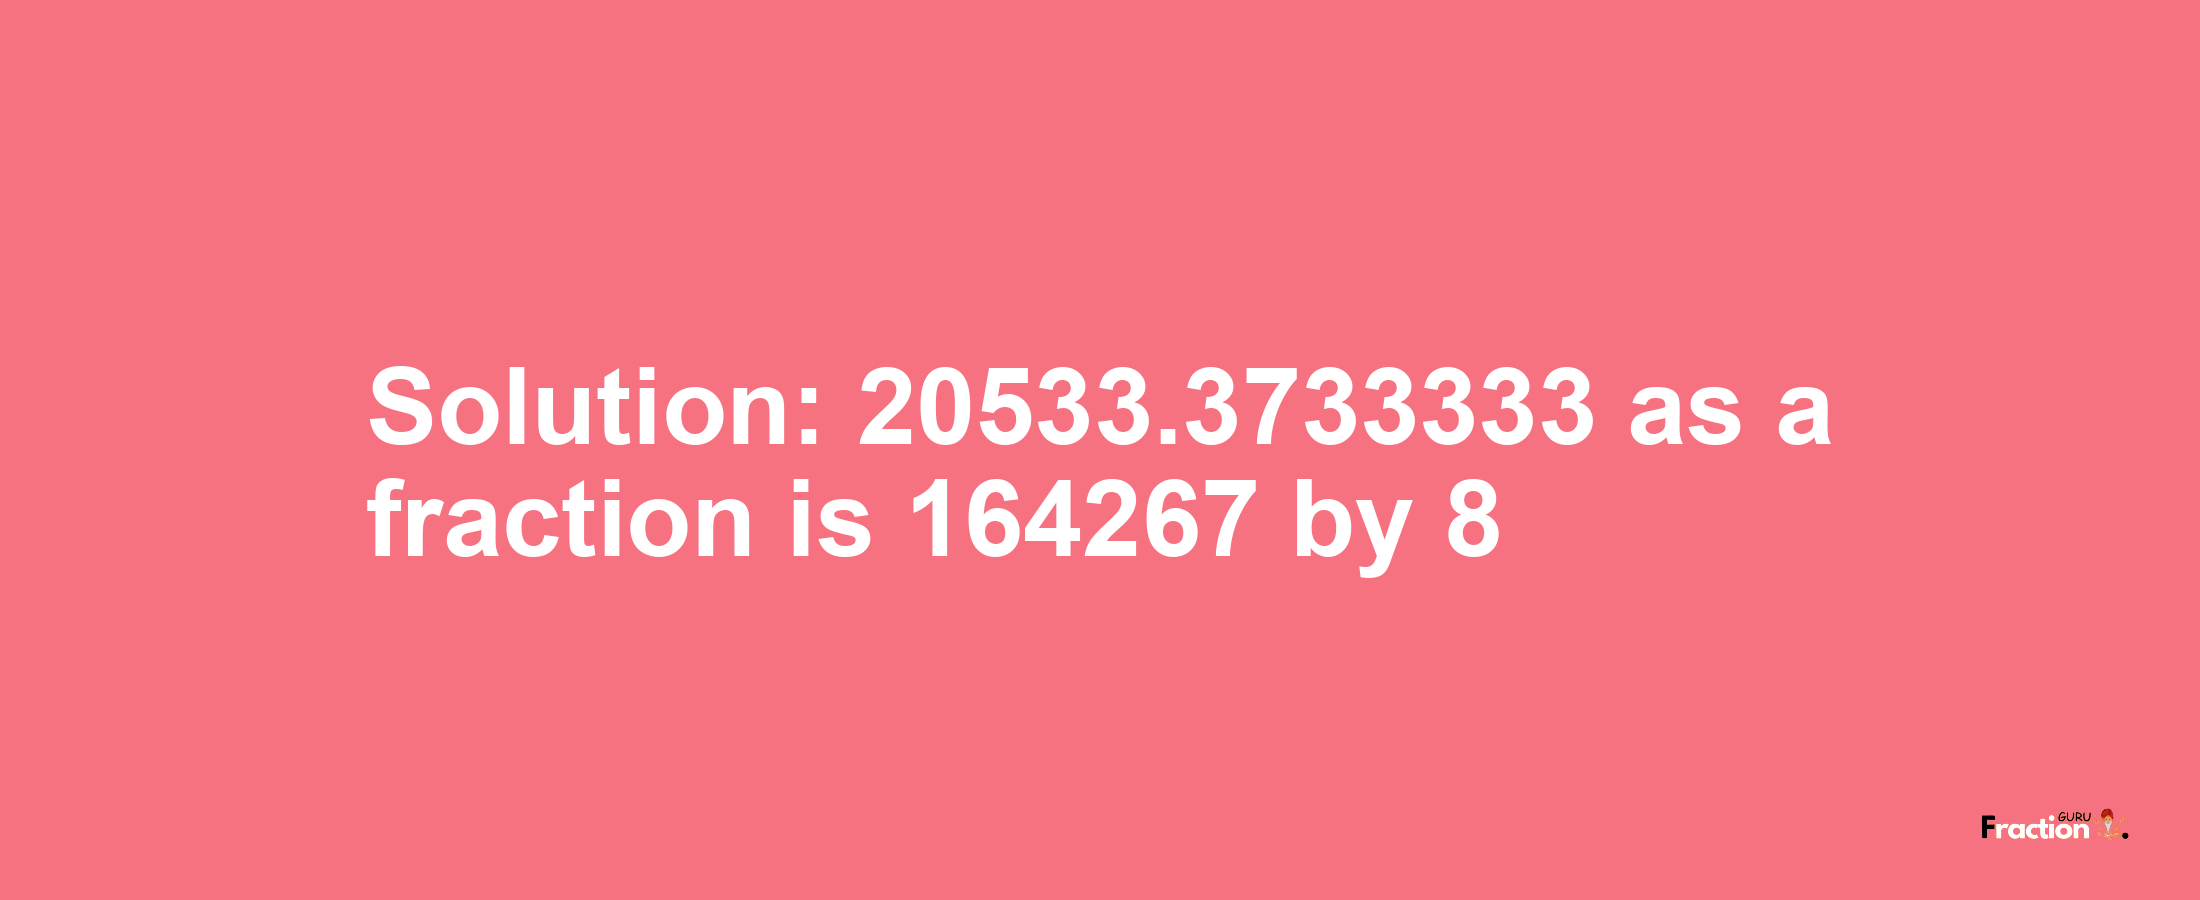 Solution:20533.3733333 as a fraction is 164267/8